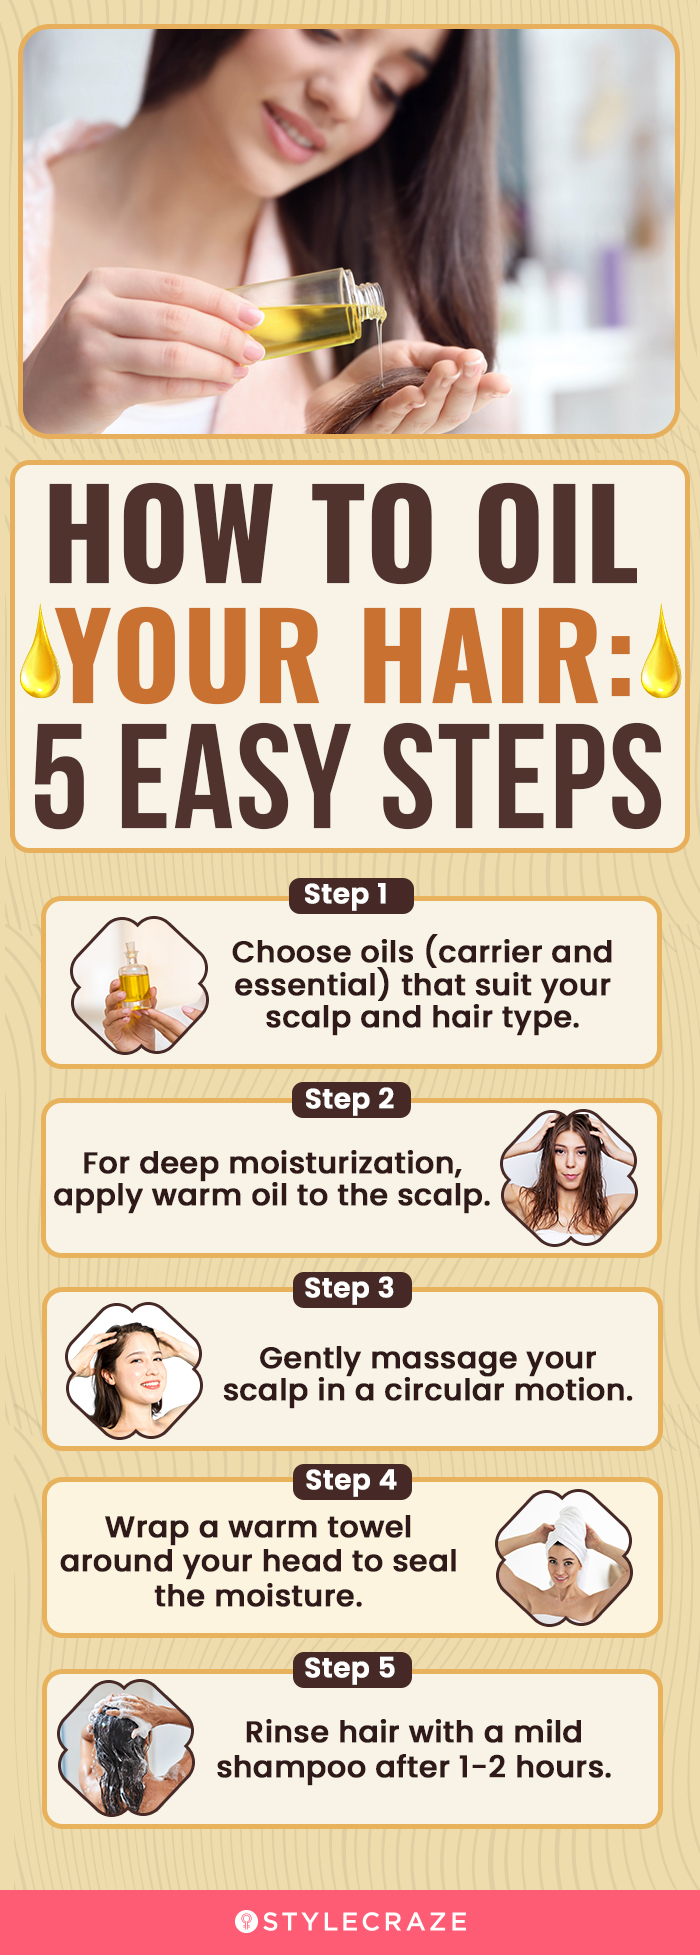 how to oil your hair 5 easy steps [infographic]